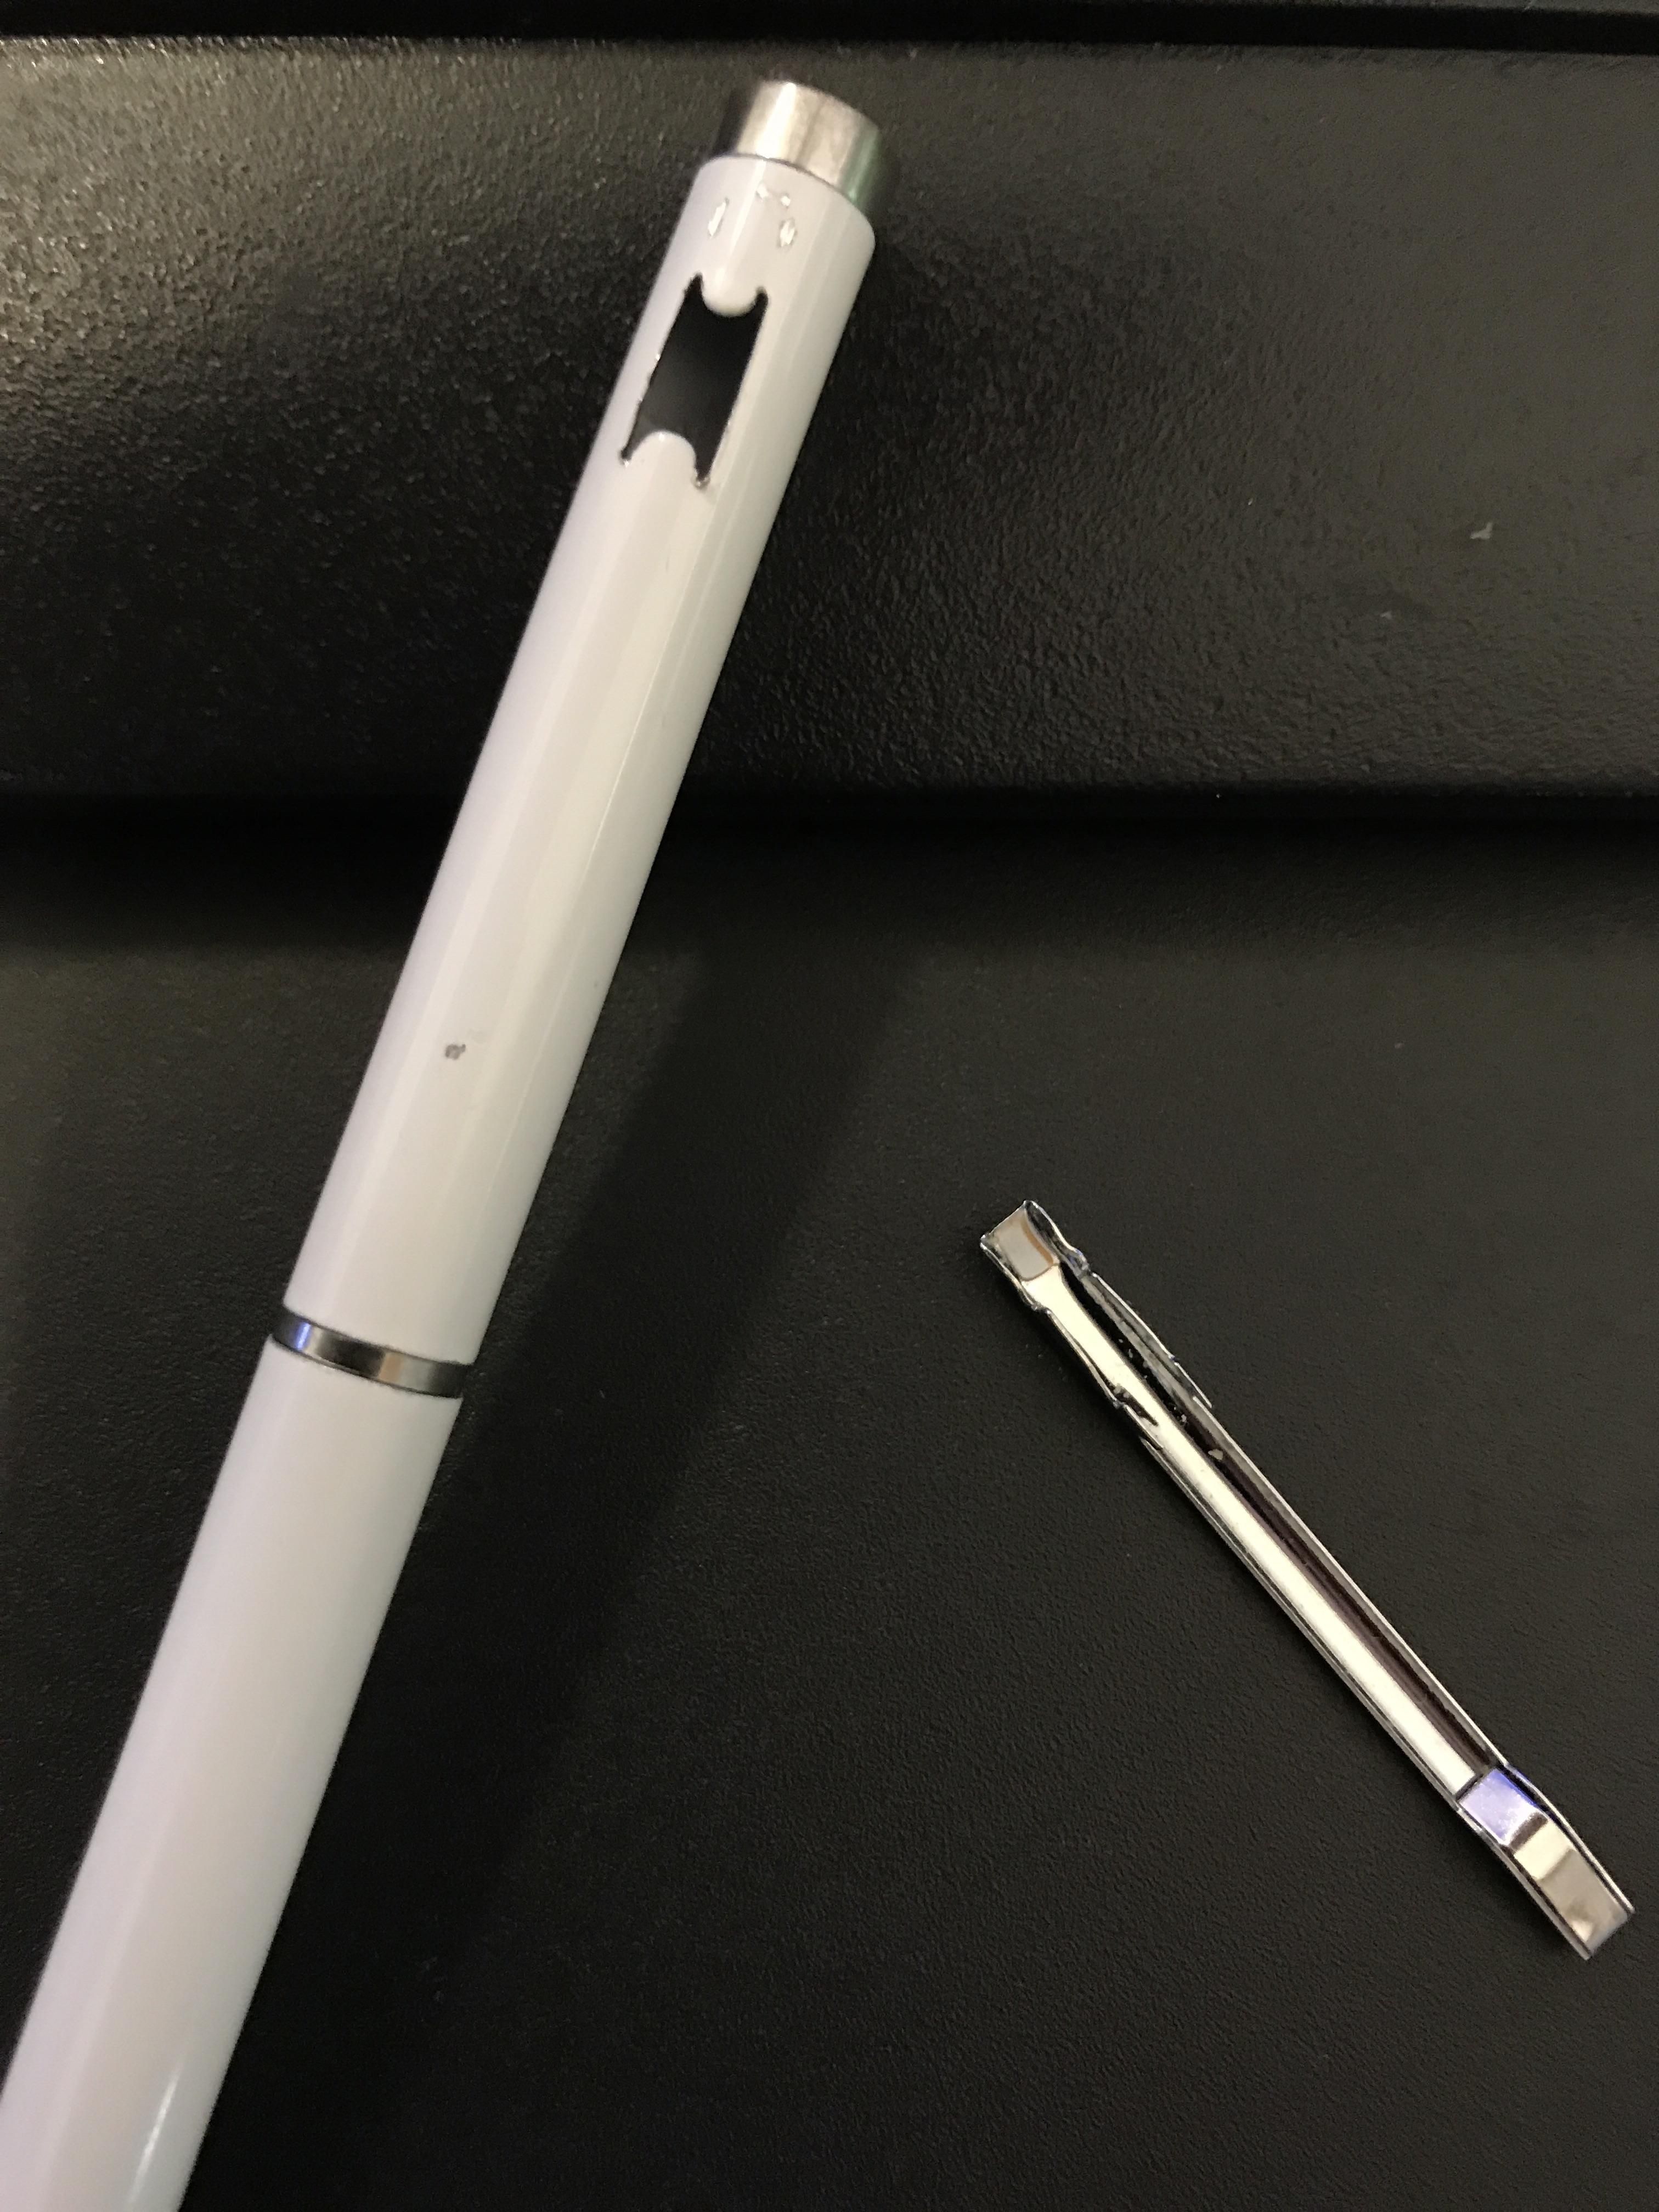 My pen lost it’s clip and looks terrified of what might happen next...